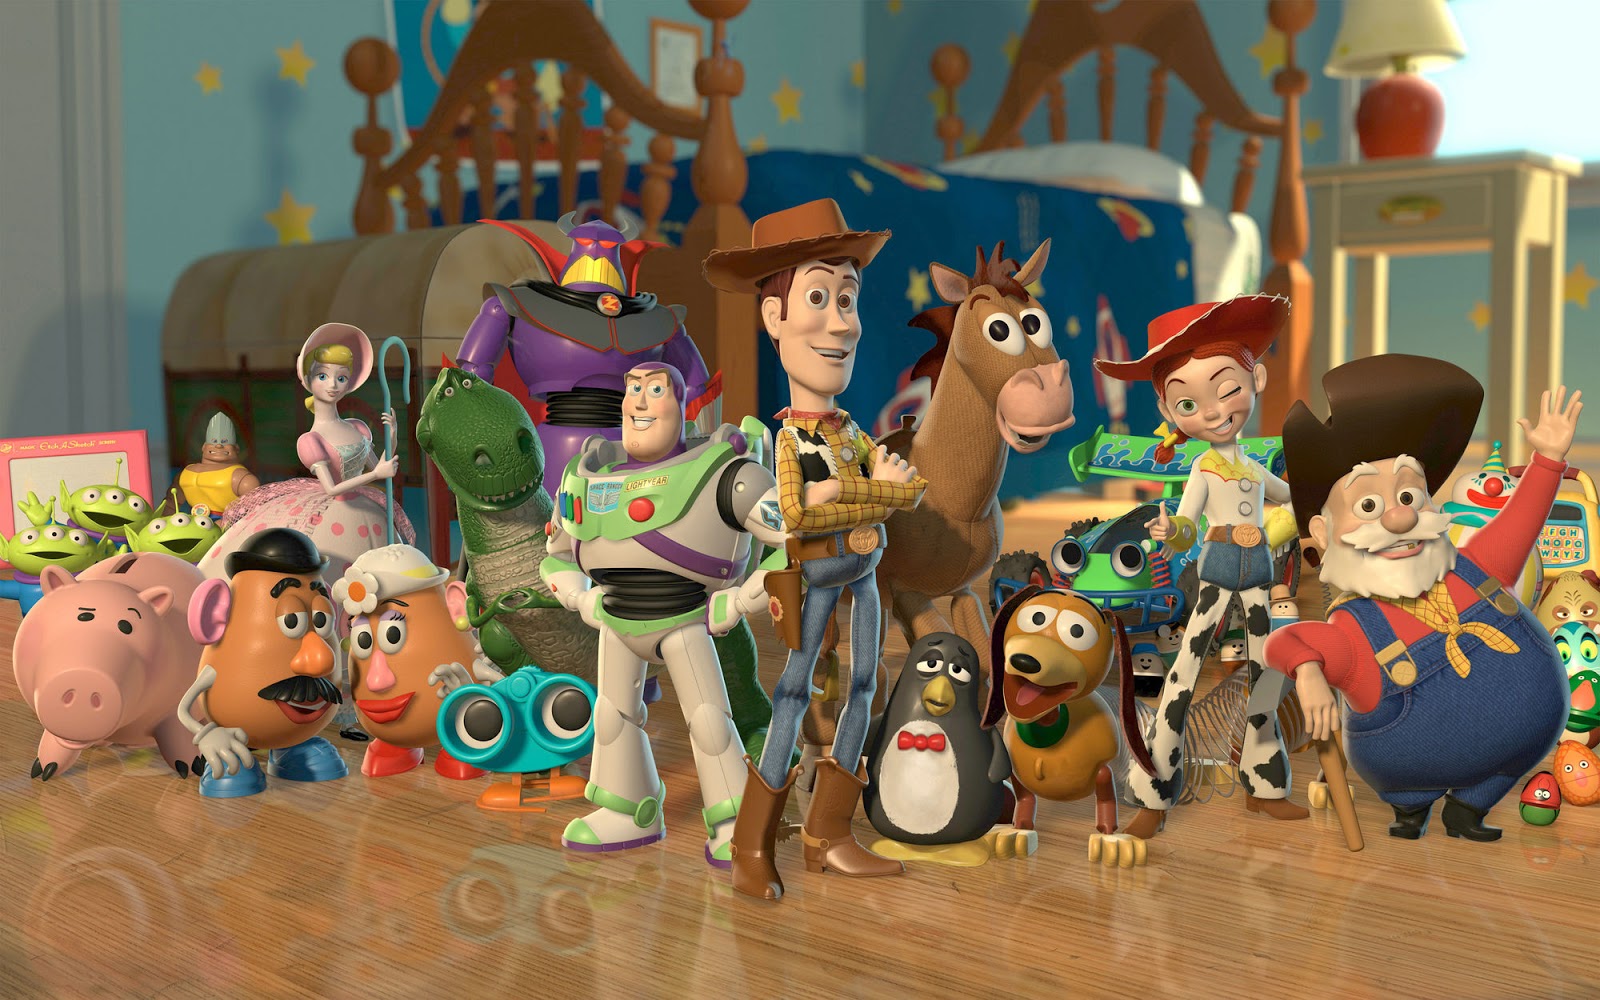 Which Three Pixar Characters Are You A Combo Of? 198